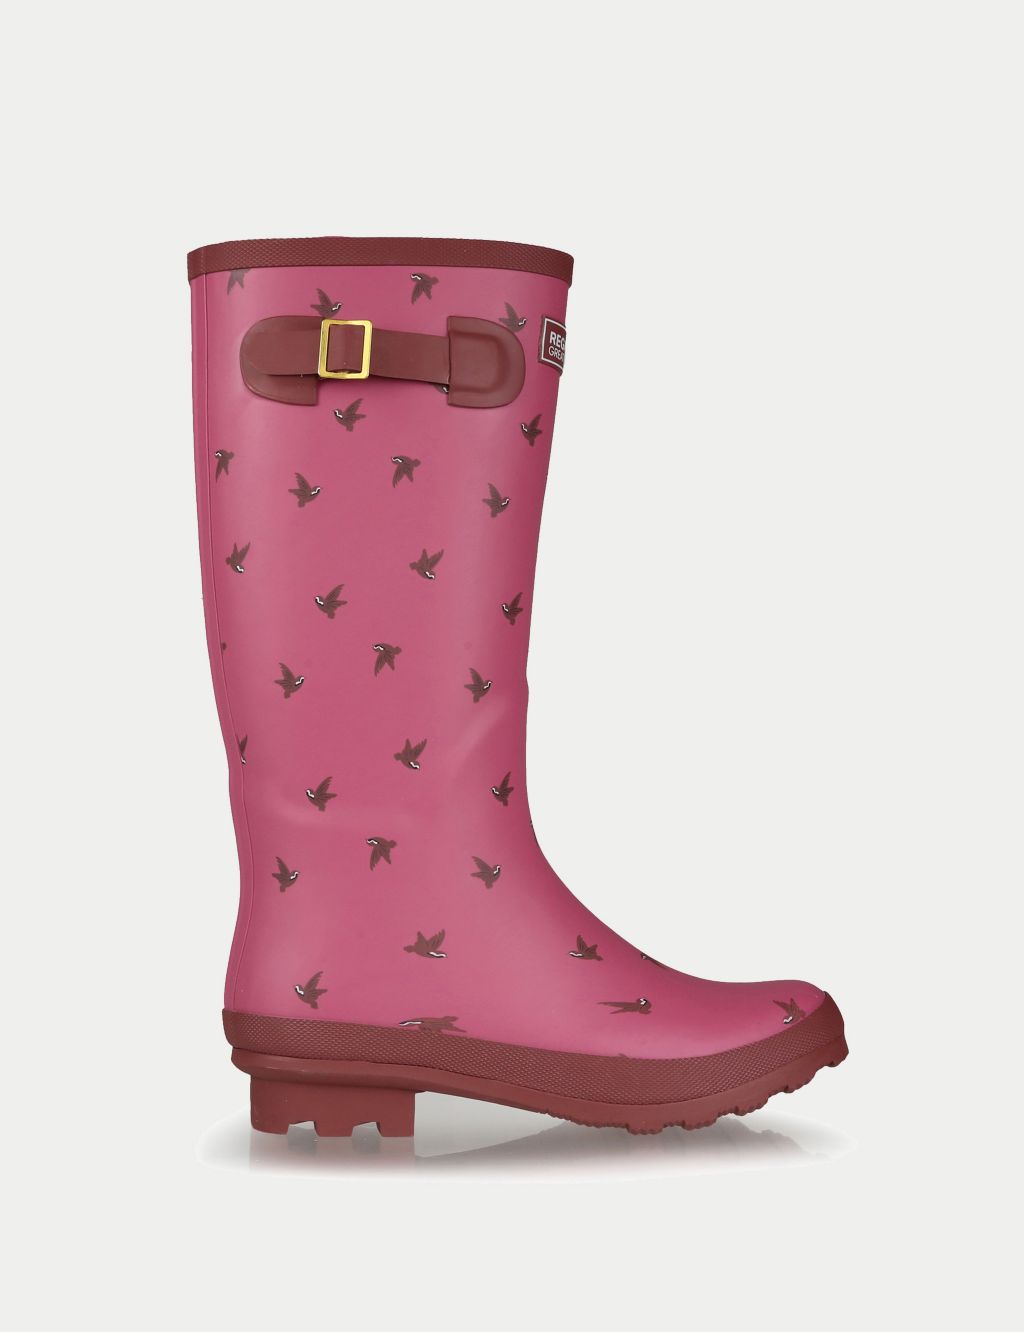 Lady Fairweather II Patterned Wellies image 1